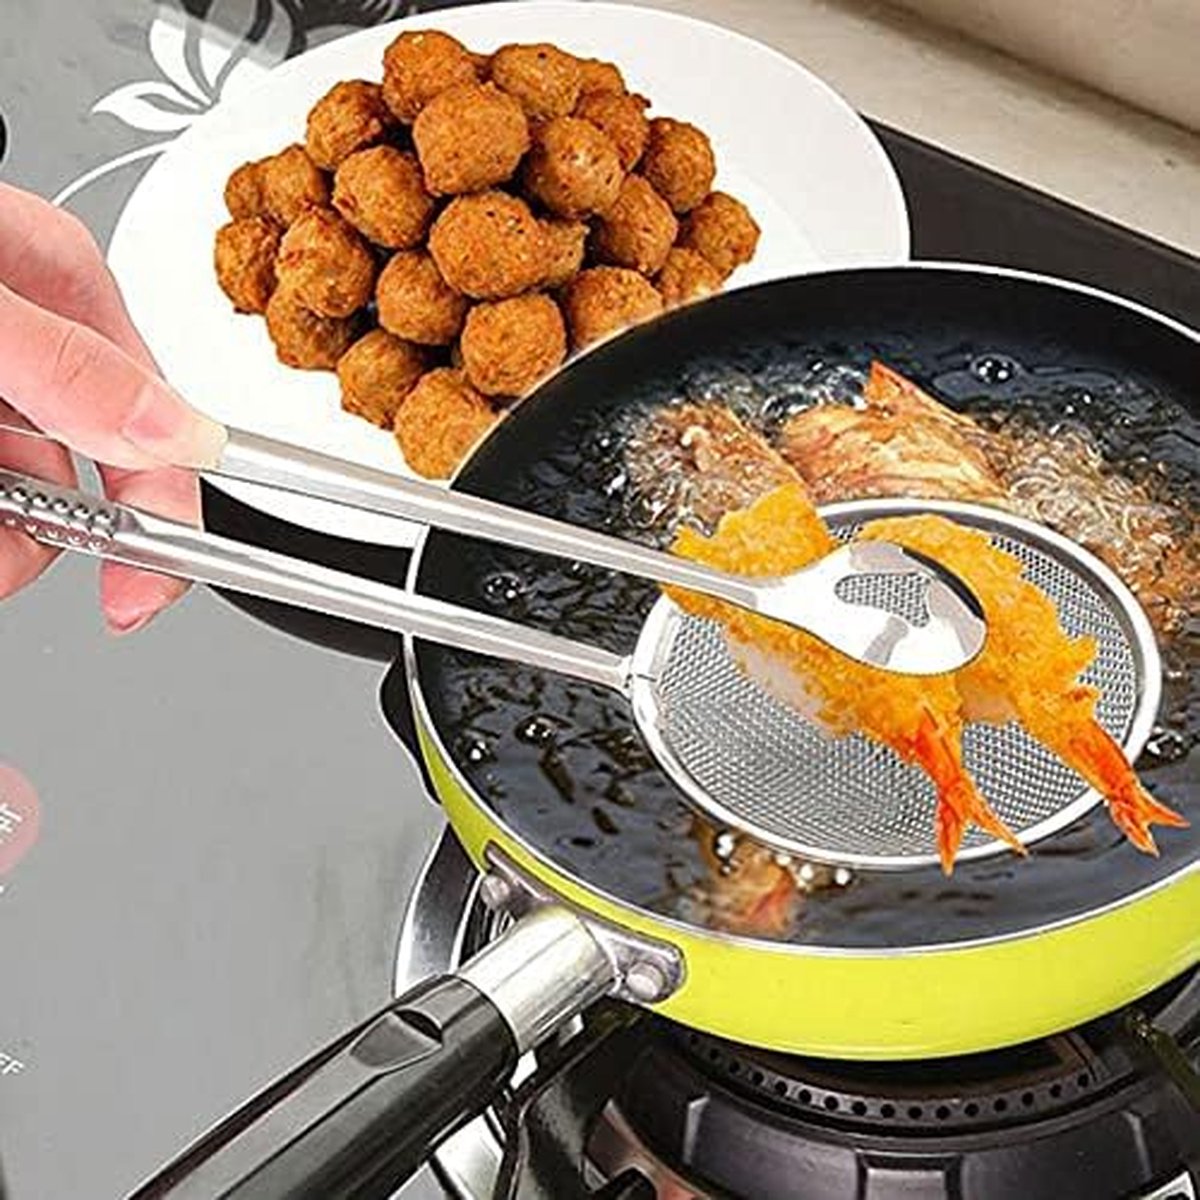 Pince cuisine pince barbecue.Pince professionnelle en INOX et silicone  alimentaire sans BPA, antidérapant, Support, Auto